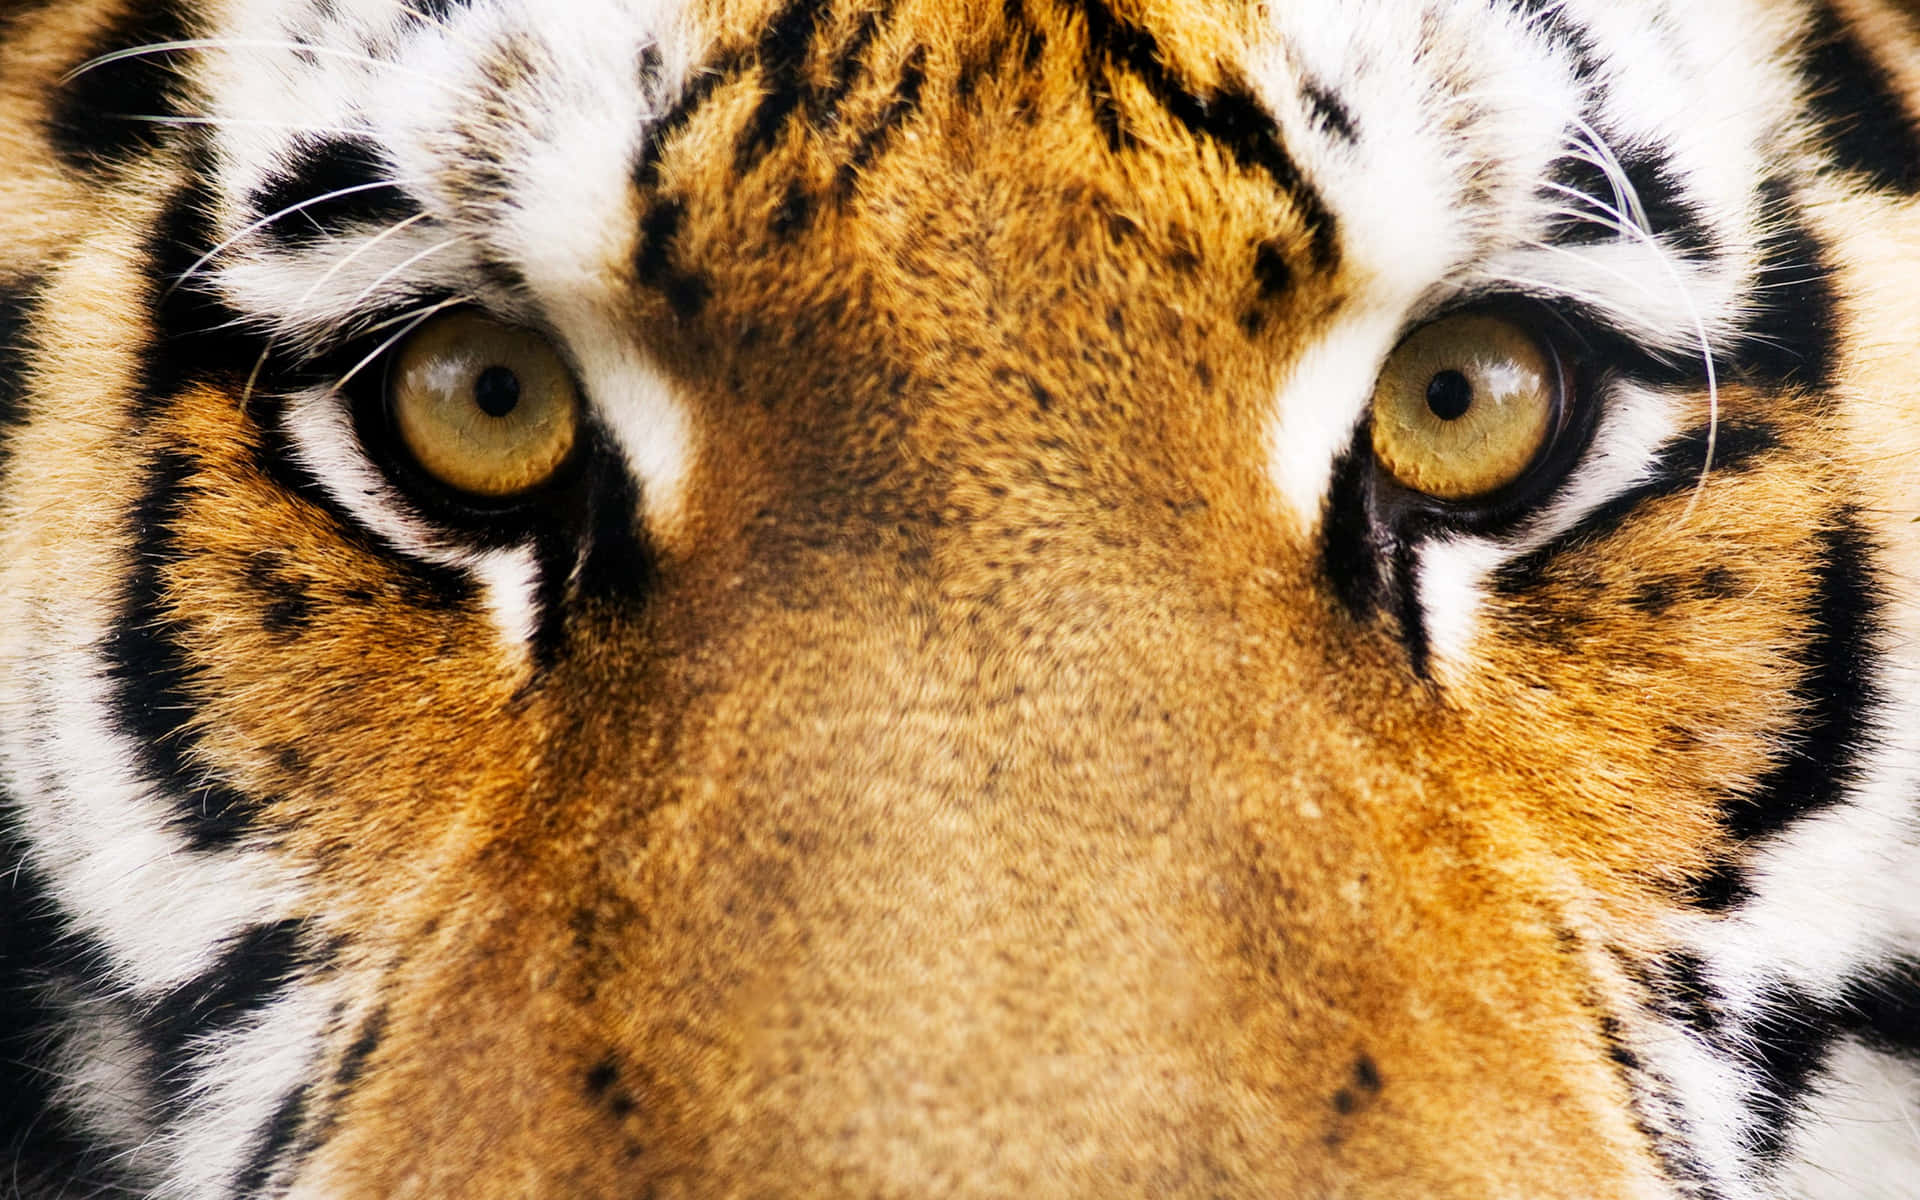 "Fierce Majesty: A Close-Up View of a Tiger's Face" Wallpaper